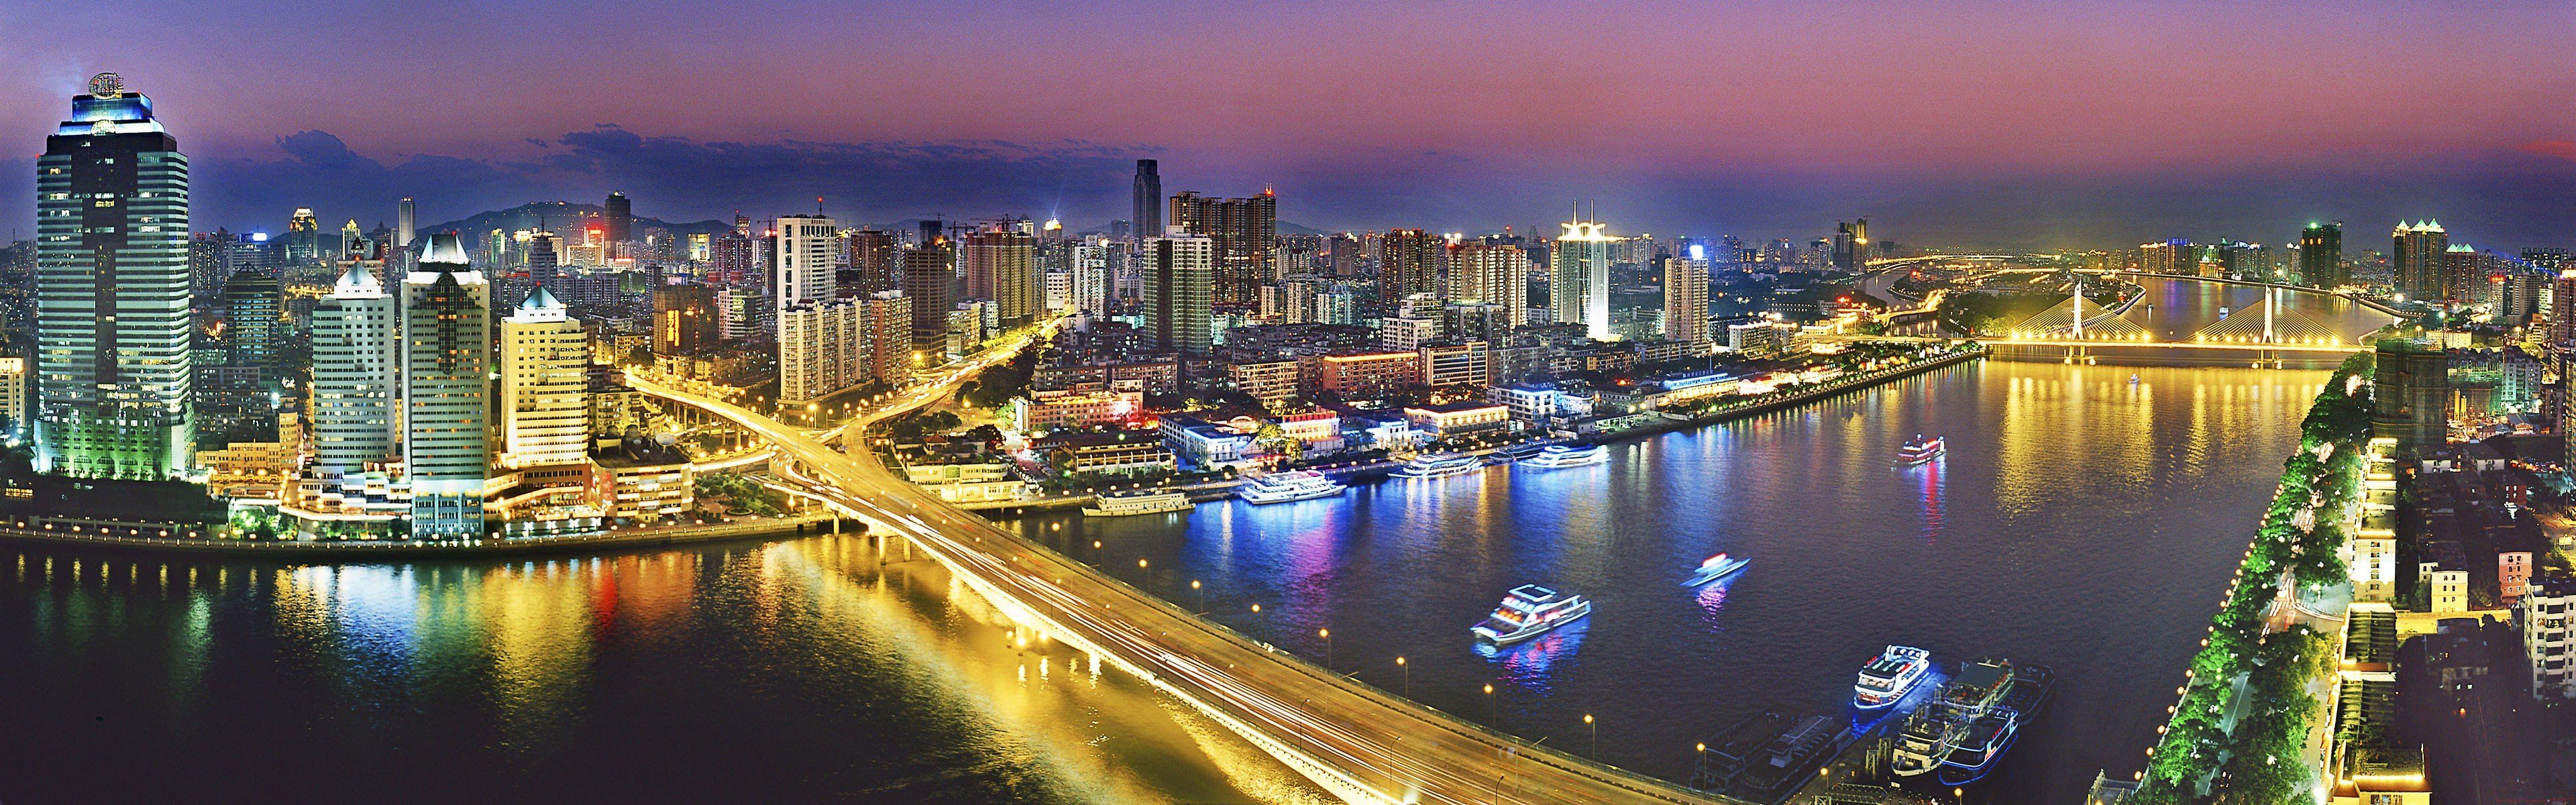 cityscapes, China, Ships, Bridges, Skyscrapers, City, Lights